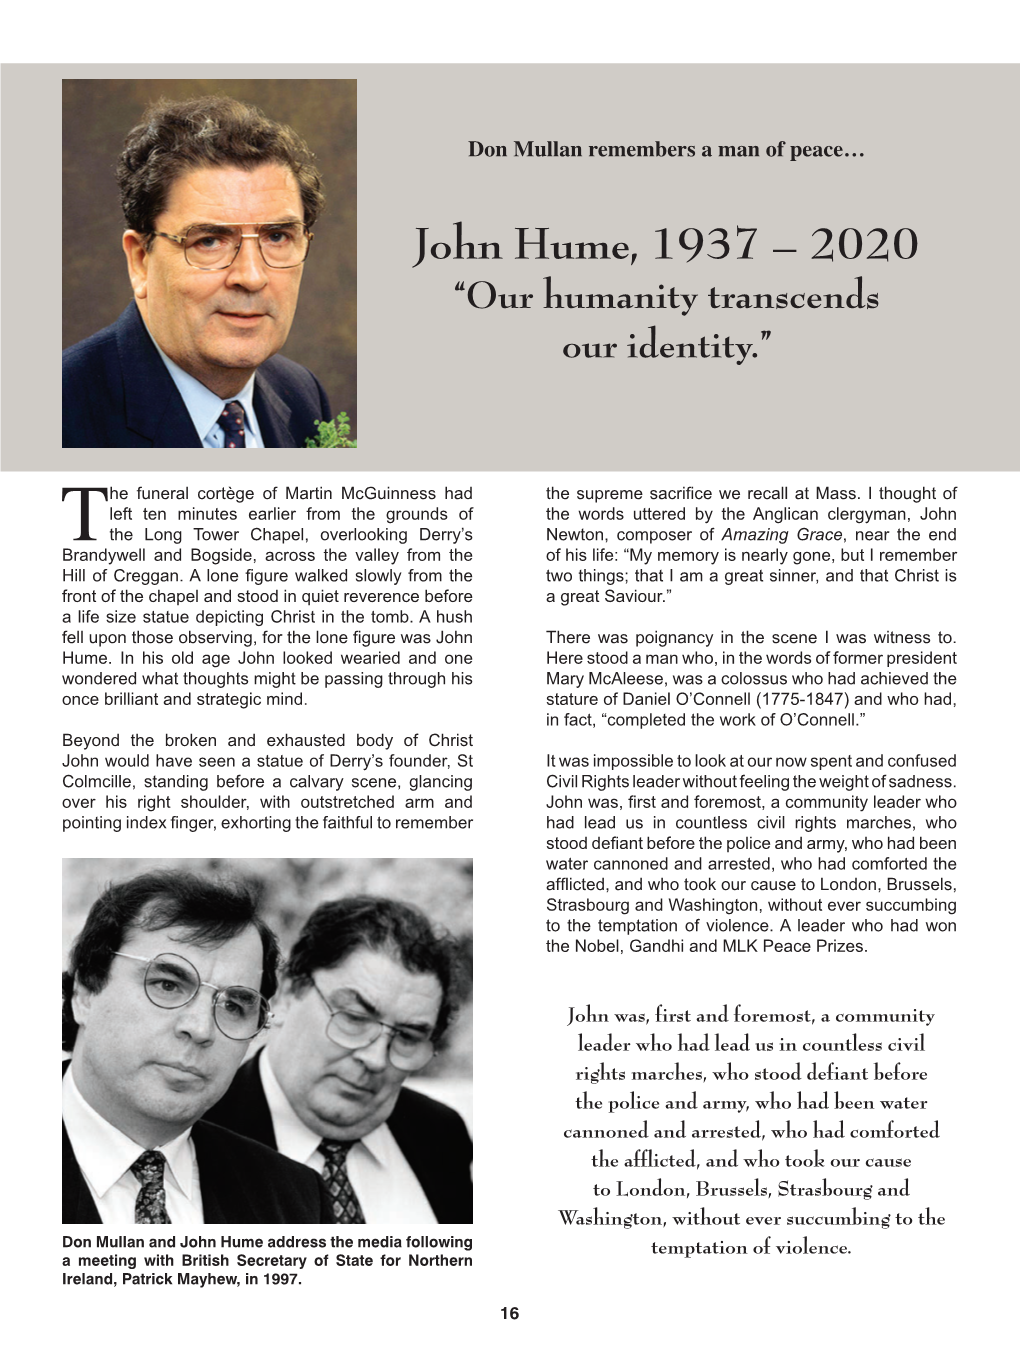 John Hume, 1937 – 2020 “Our Humanity Transcends Our Identity.”